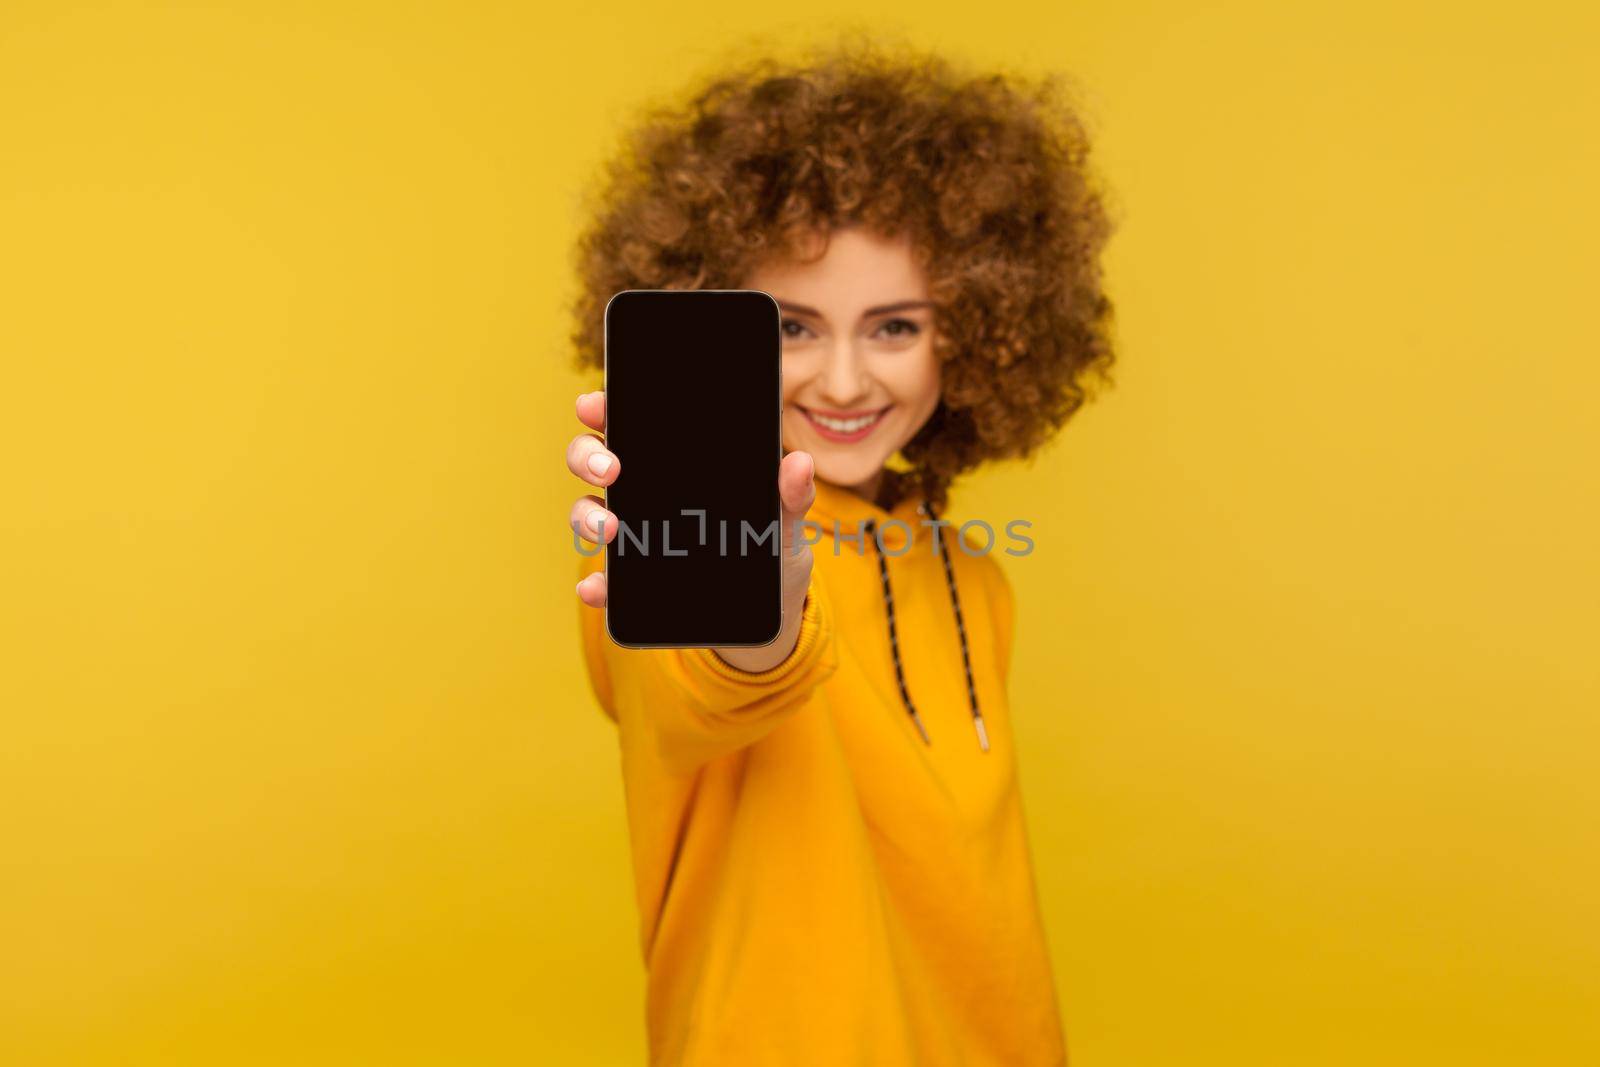 Portrait of cheerful curly-haired woman with engaging smile showing cellphone with empty display, mock up for app advertise, mobile web service. indoor studio shot isolated on yellow background